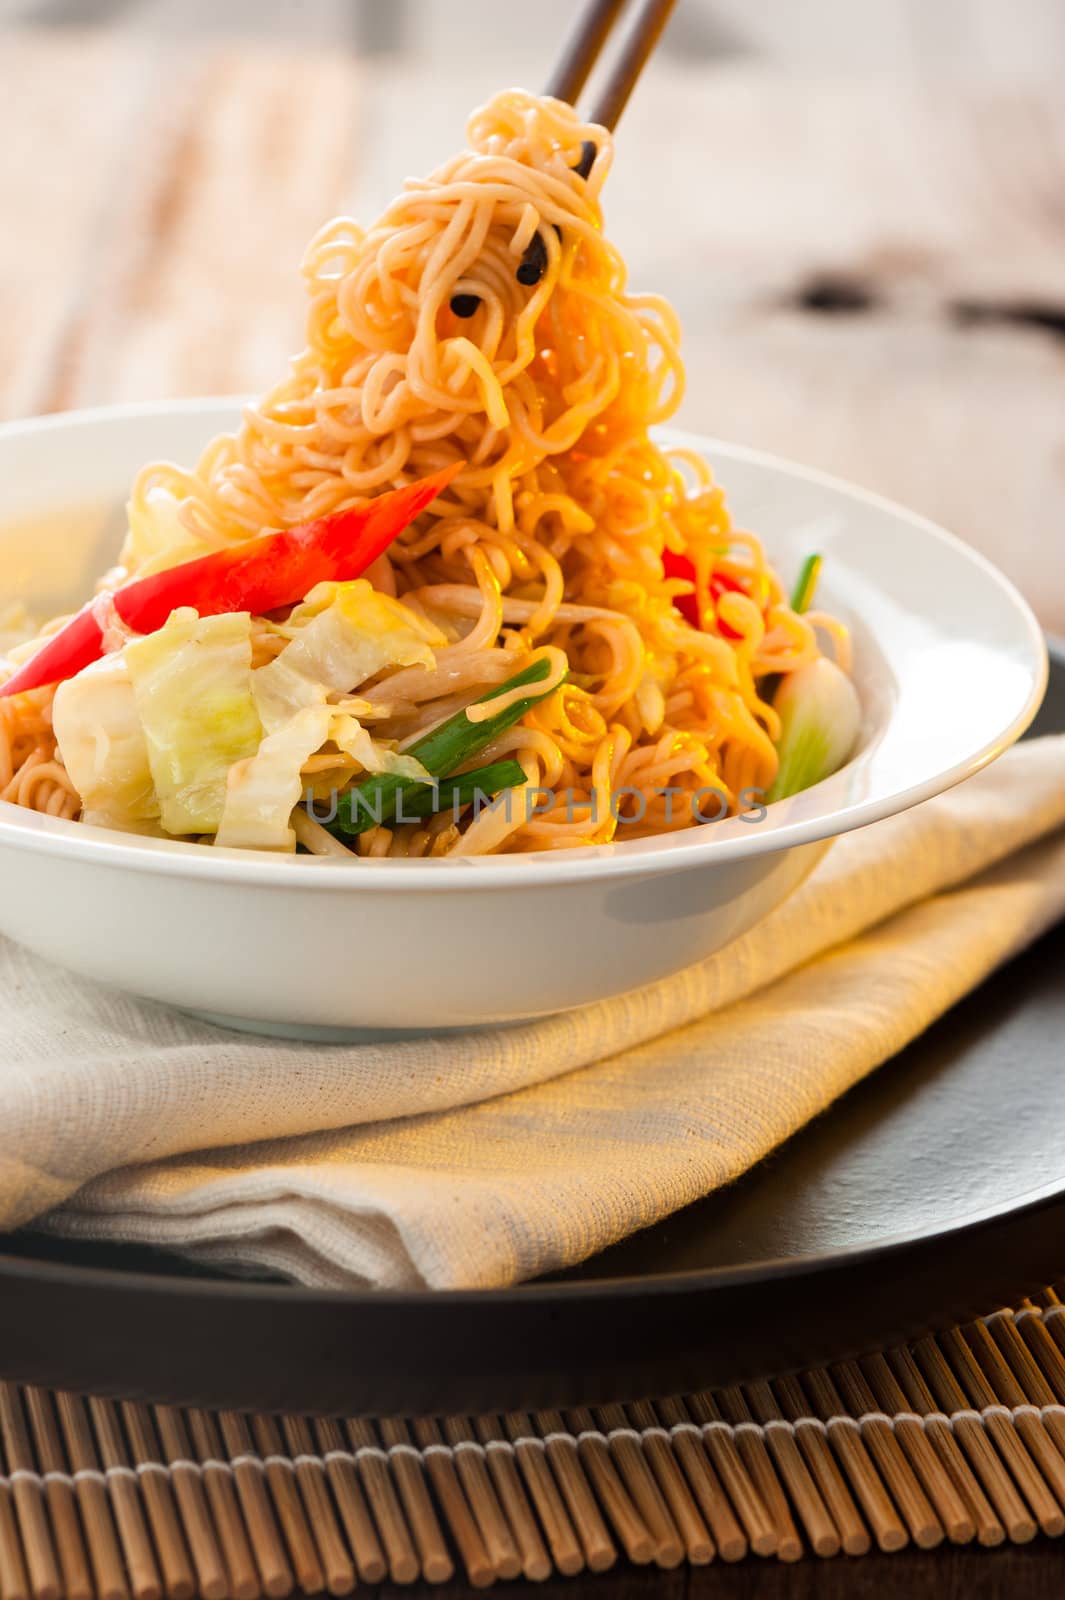 Asian vegetables noodles in white plate and chopsticks on wooden table as background